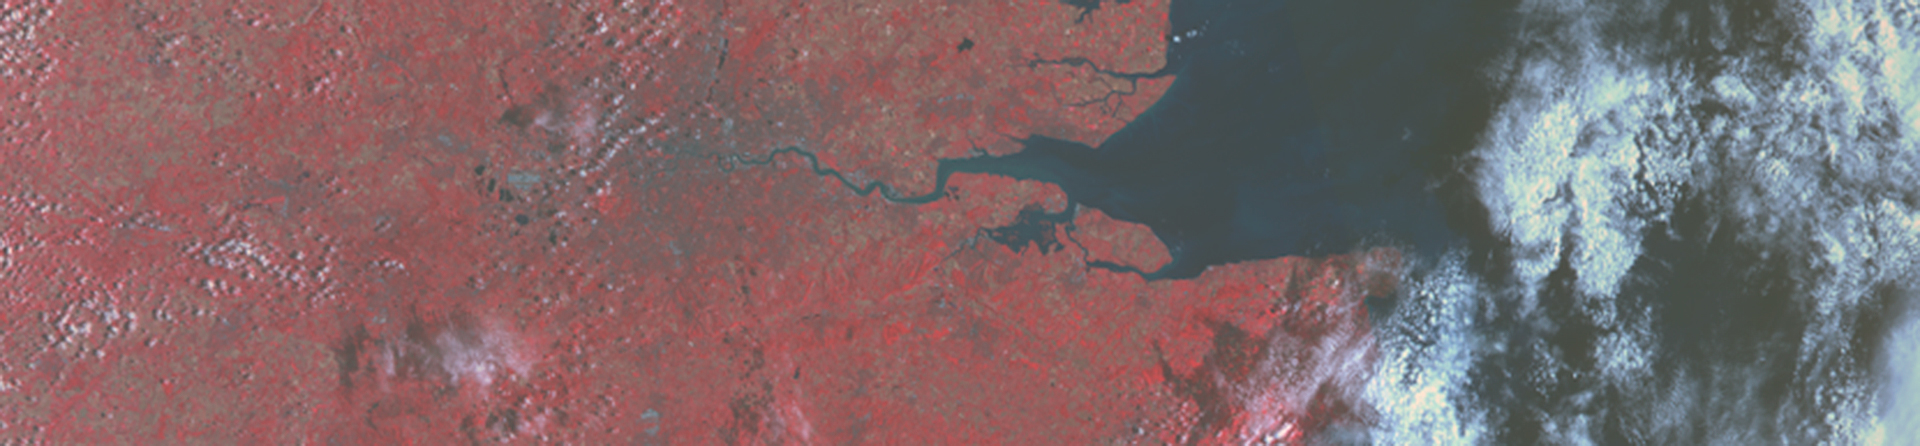 High level satellite image showing the south-east of England in various shades of red with banks of white cloud to right